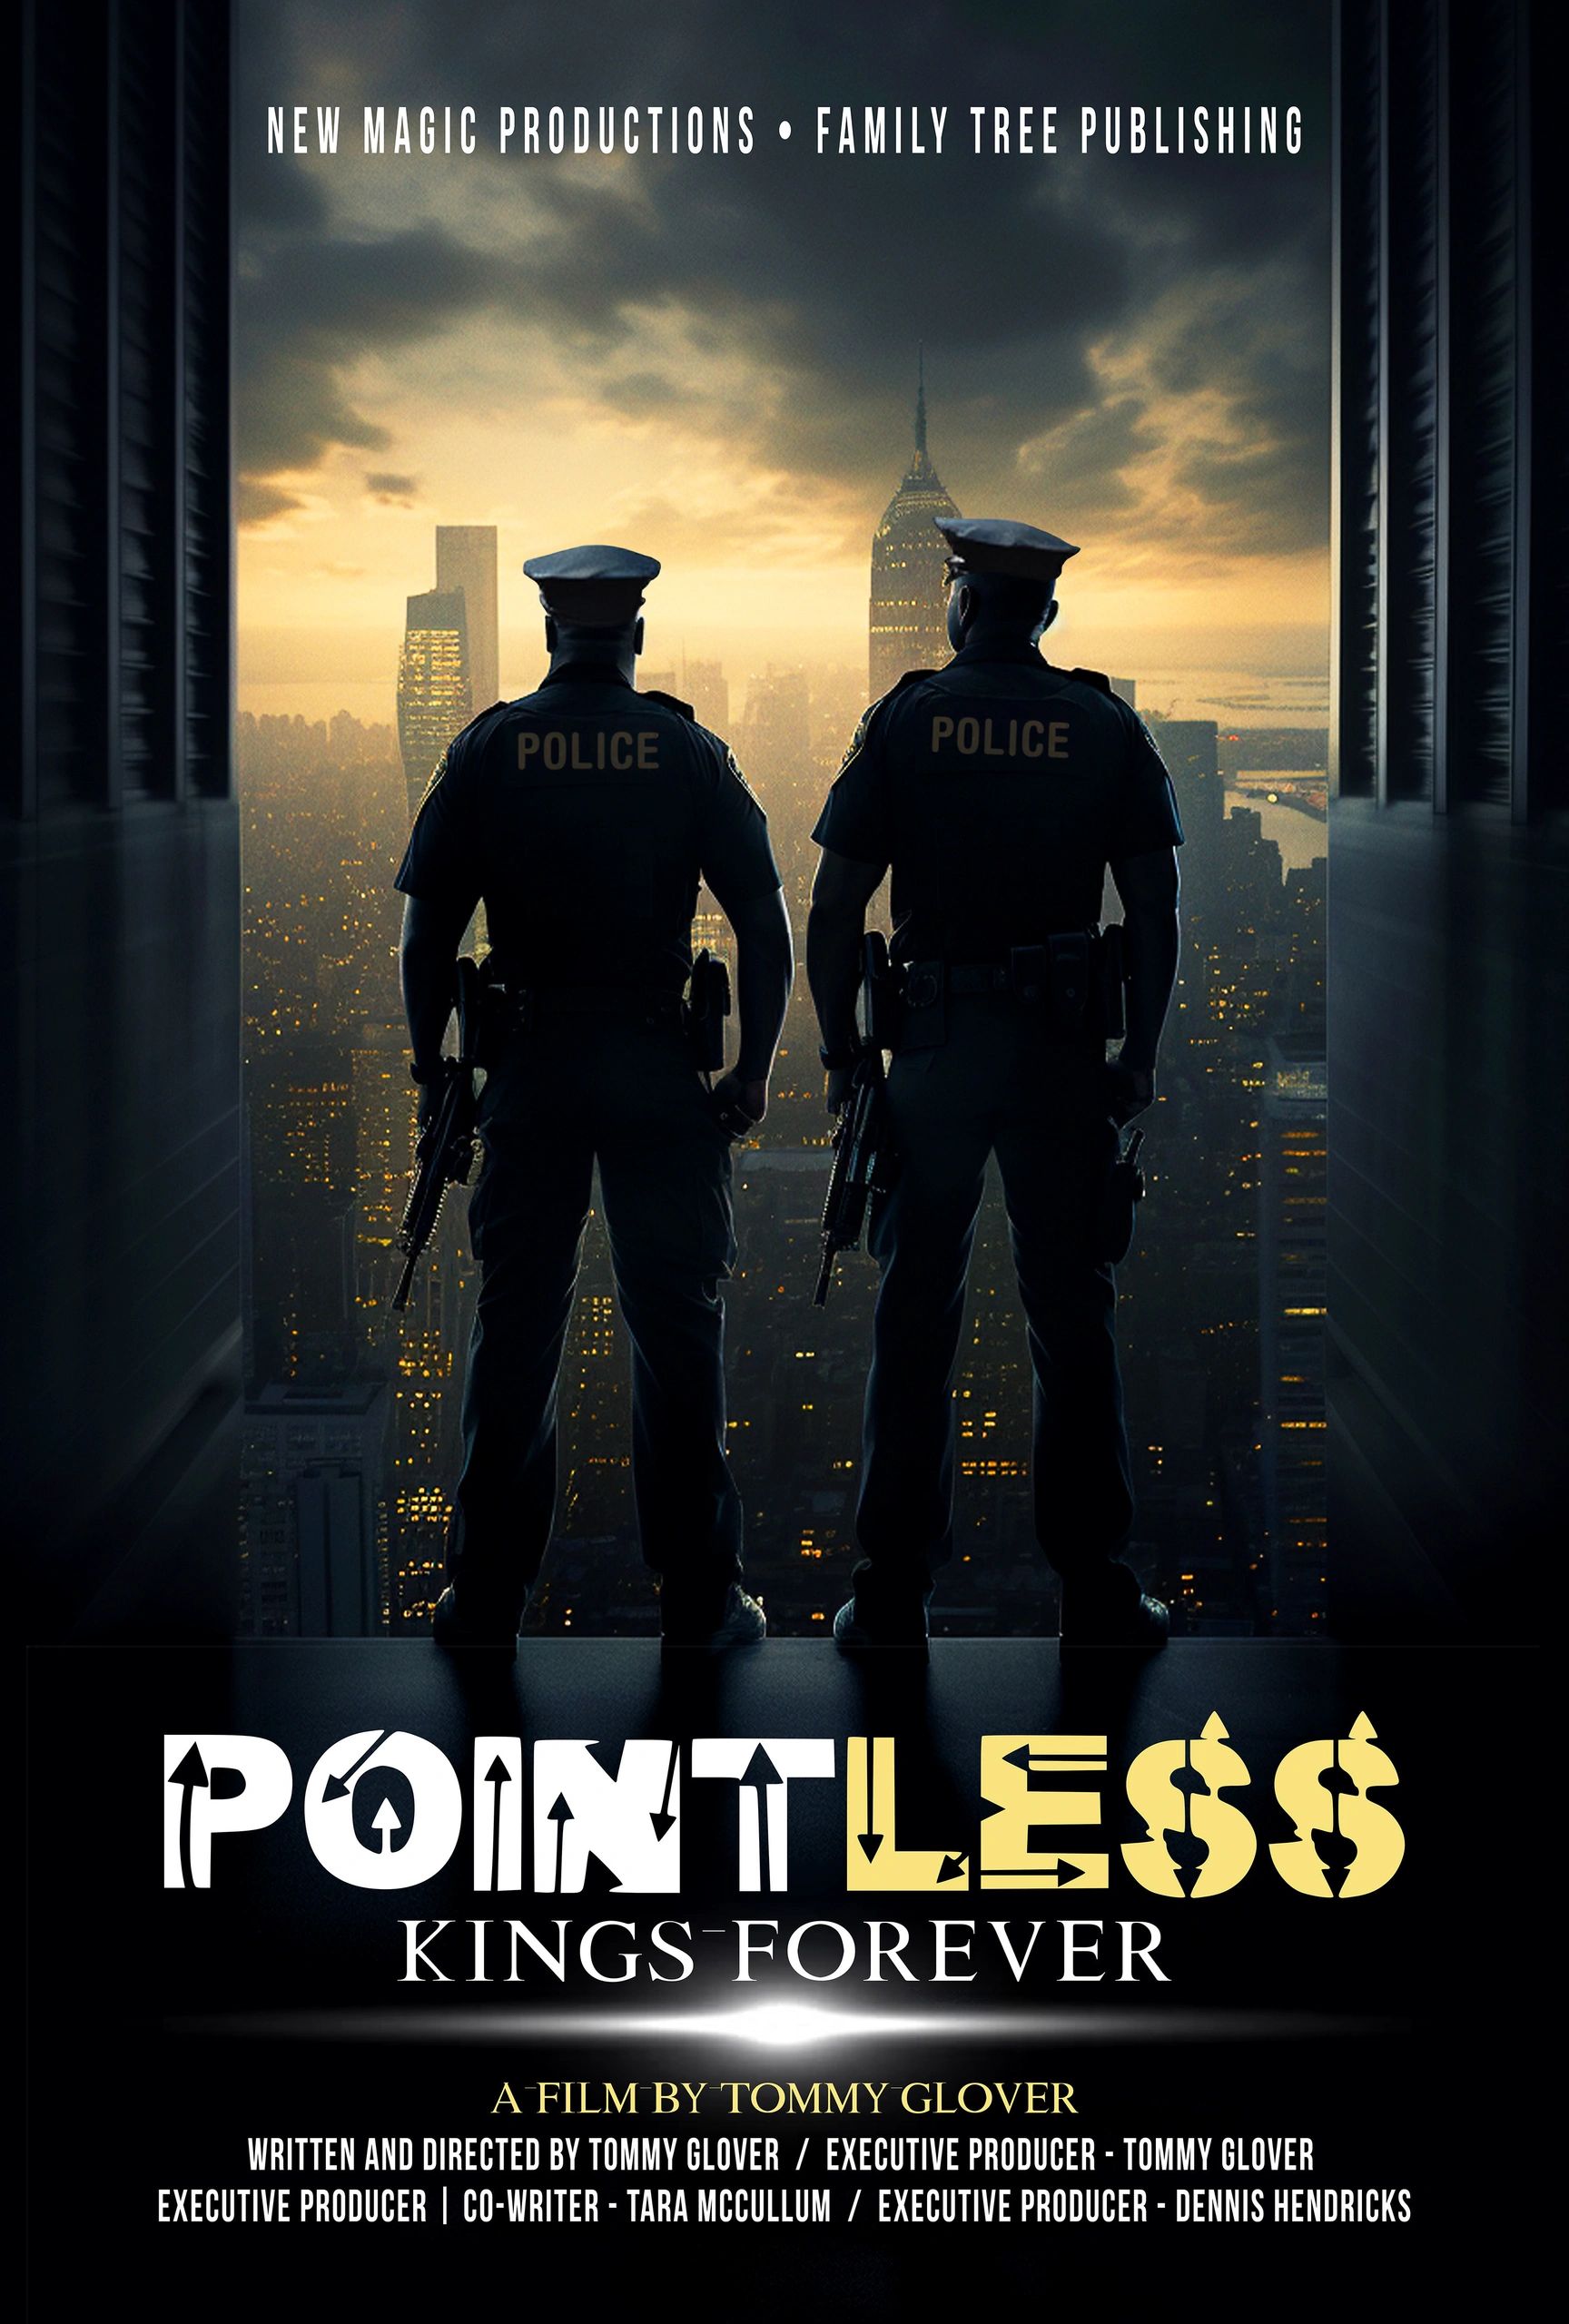 Pointless Movie Poster 
Property of New Magic Productions